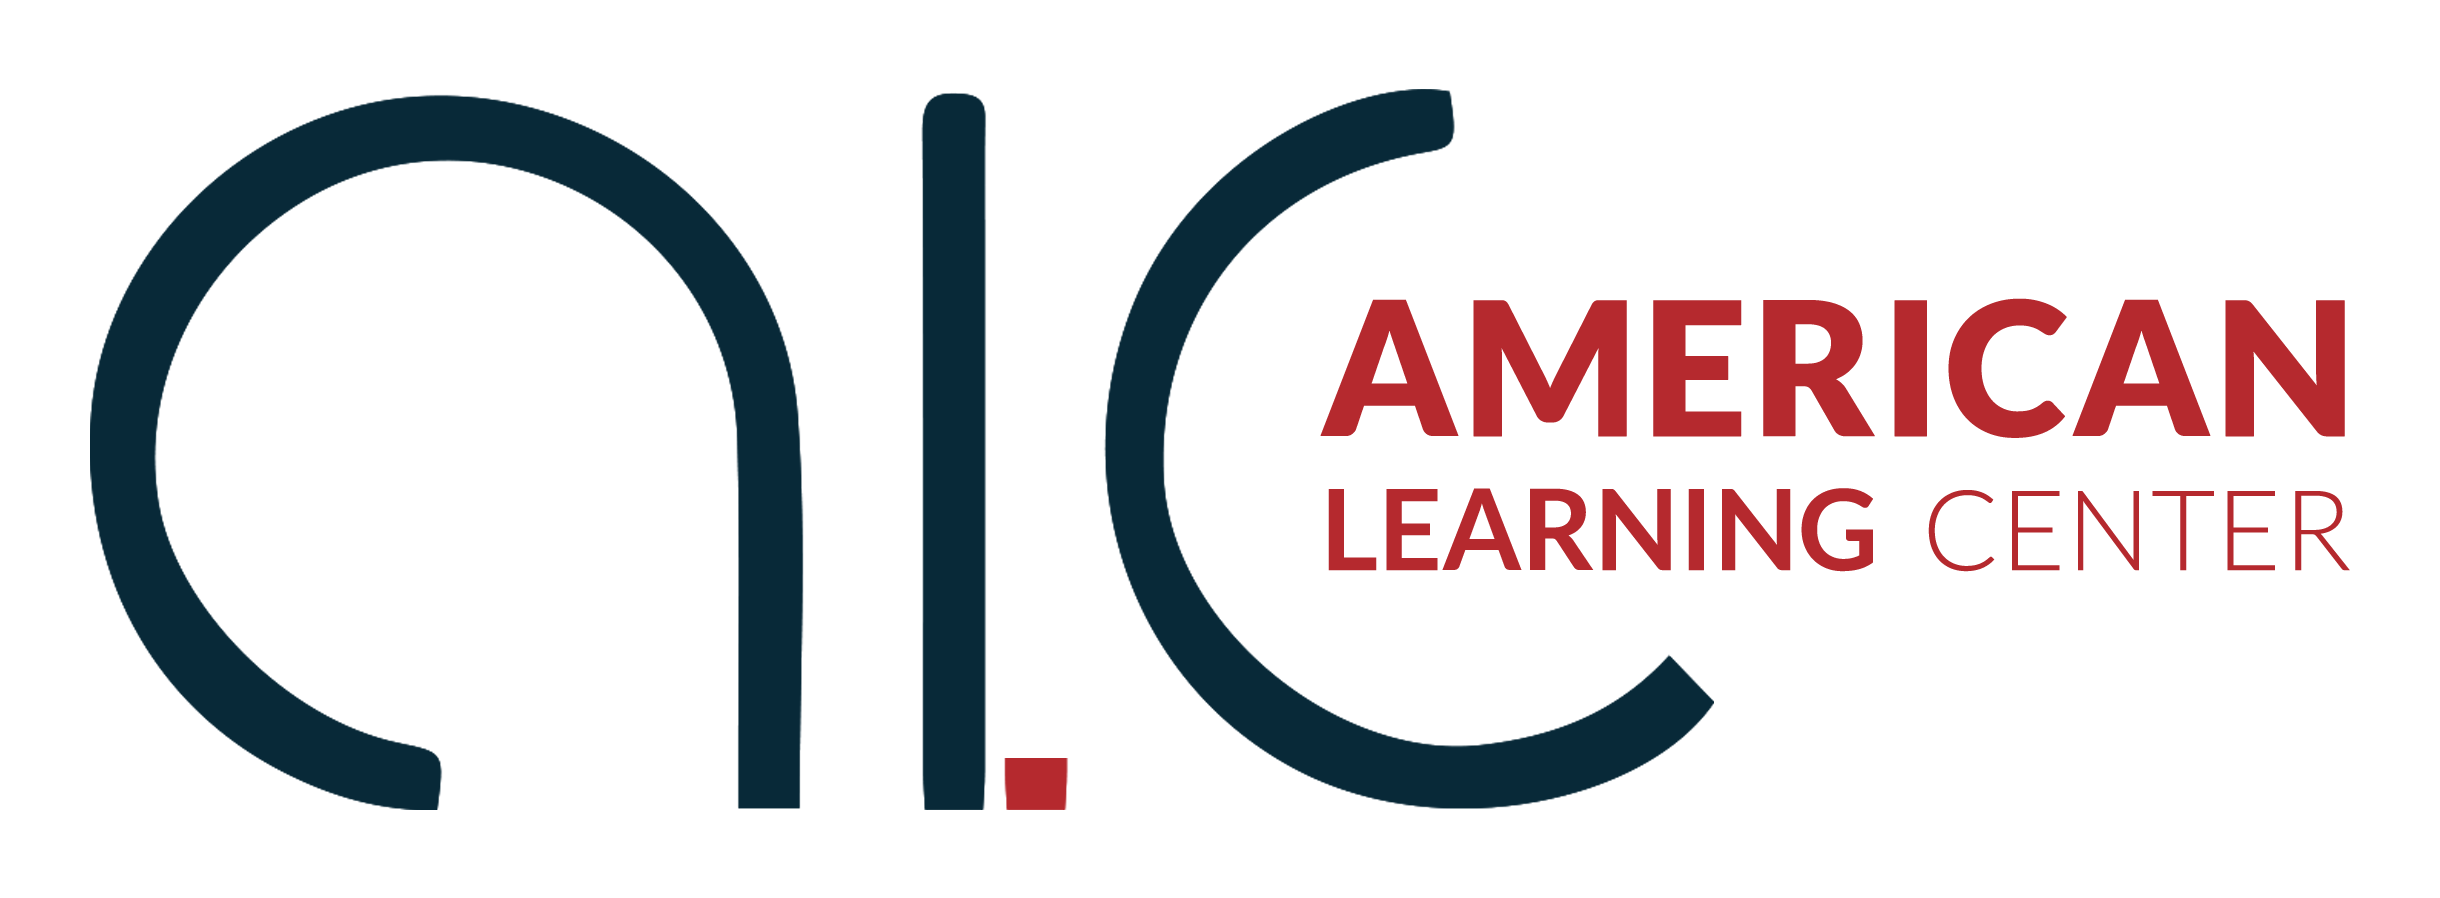 American Learning Center